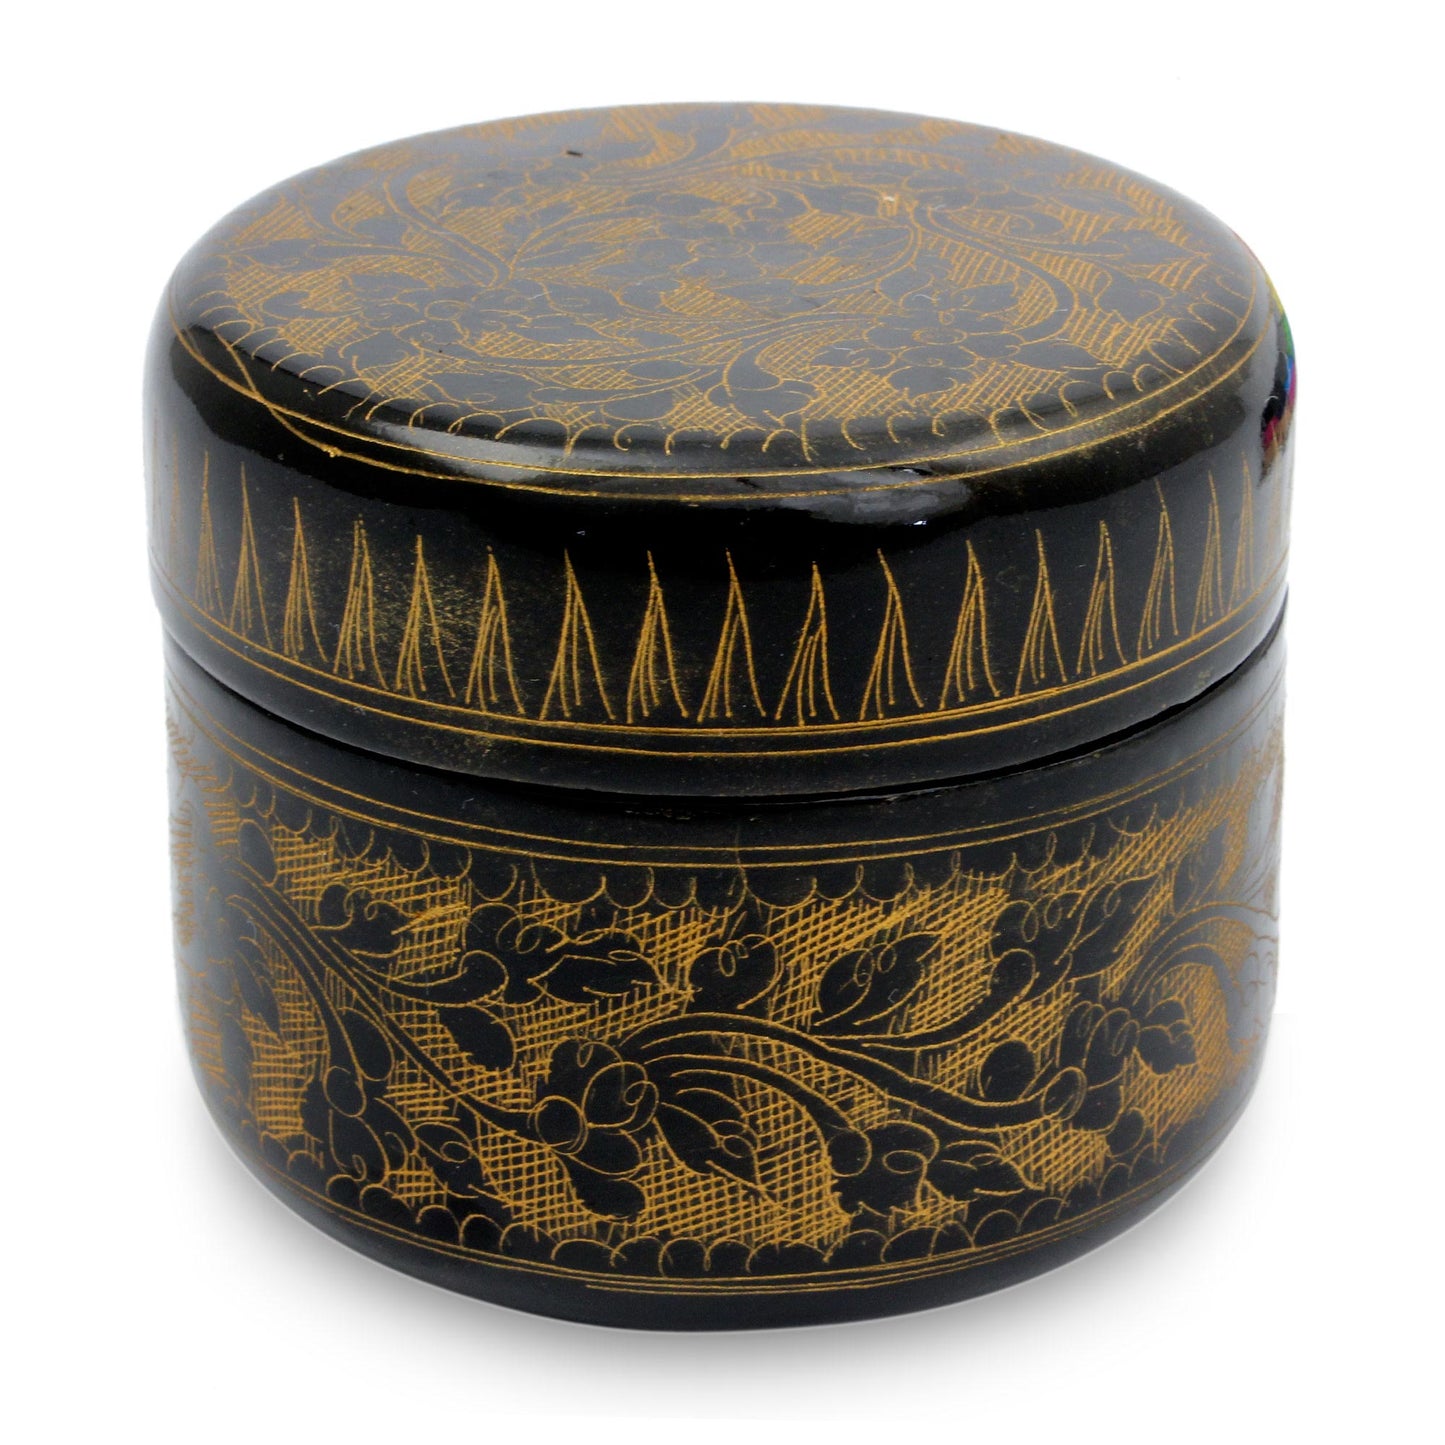 Exotic Golden Flora Round Decorative Box Handcrafted Lacquered Wood